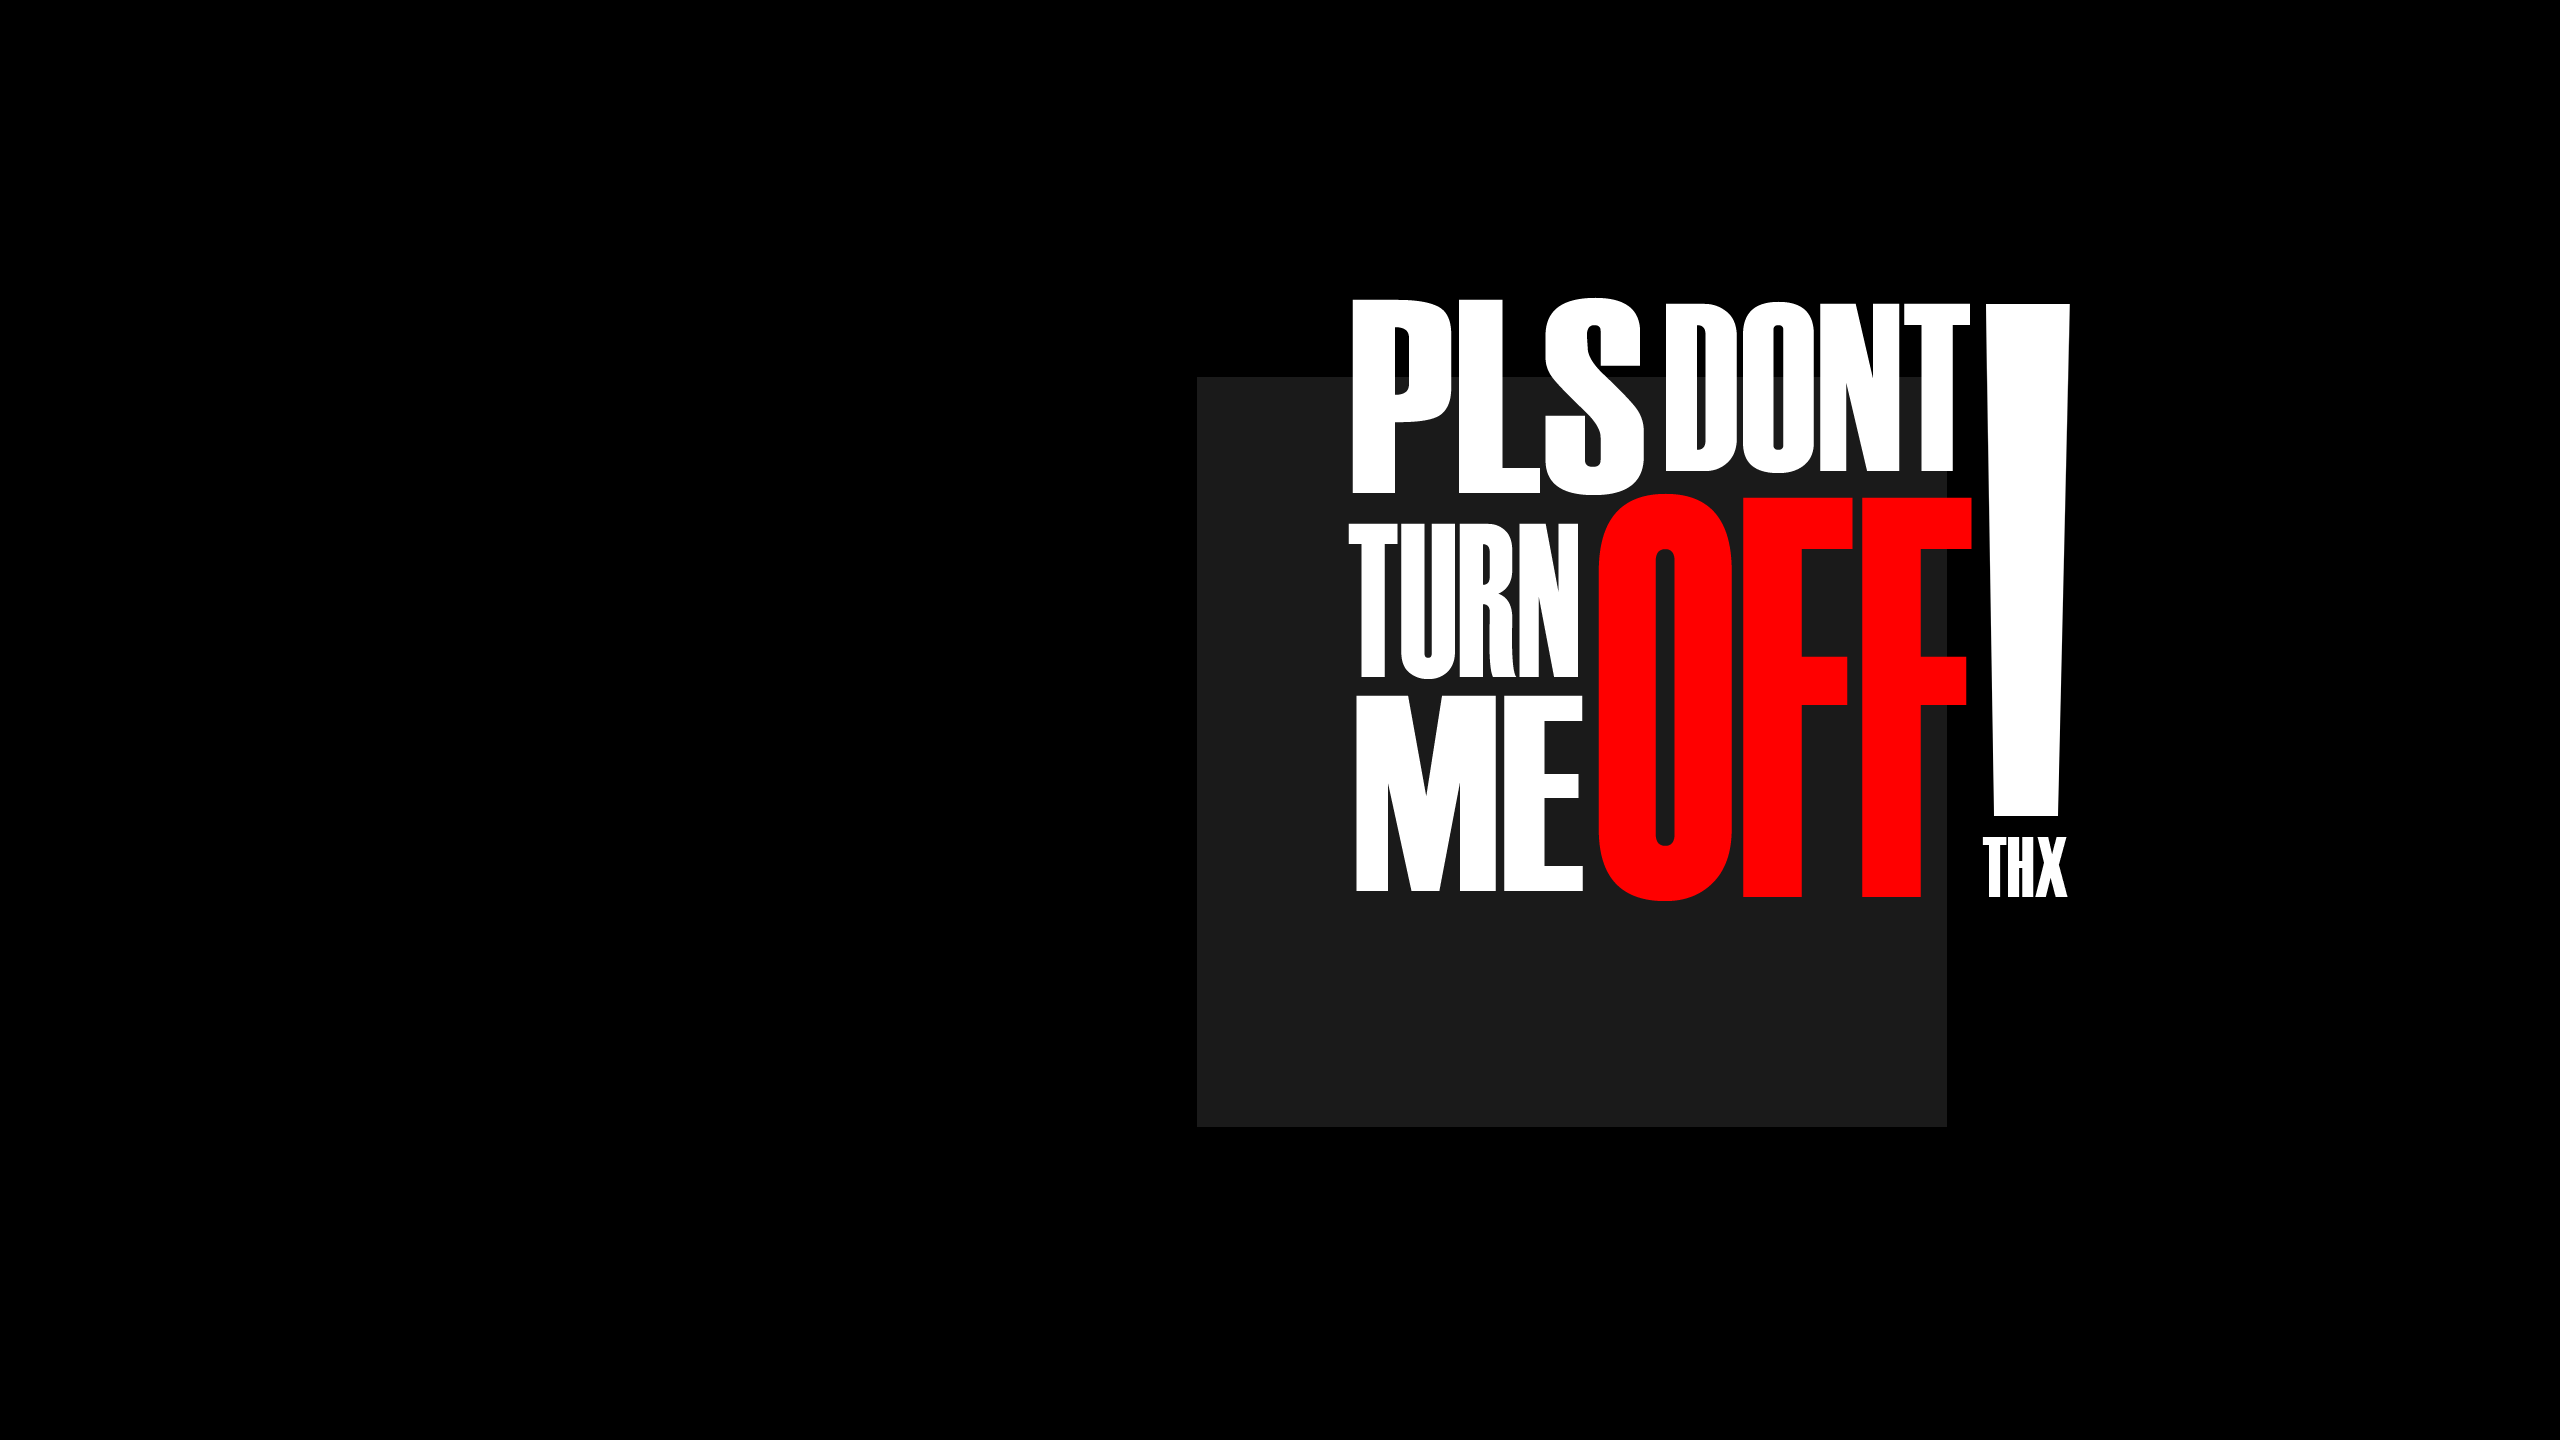 Plz Dont turn me off. Funny text messages, Funny texts, HD widescreen wallpaper